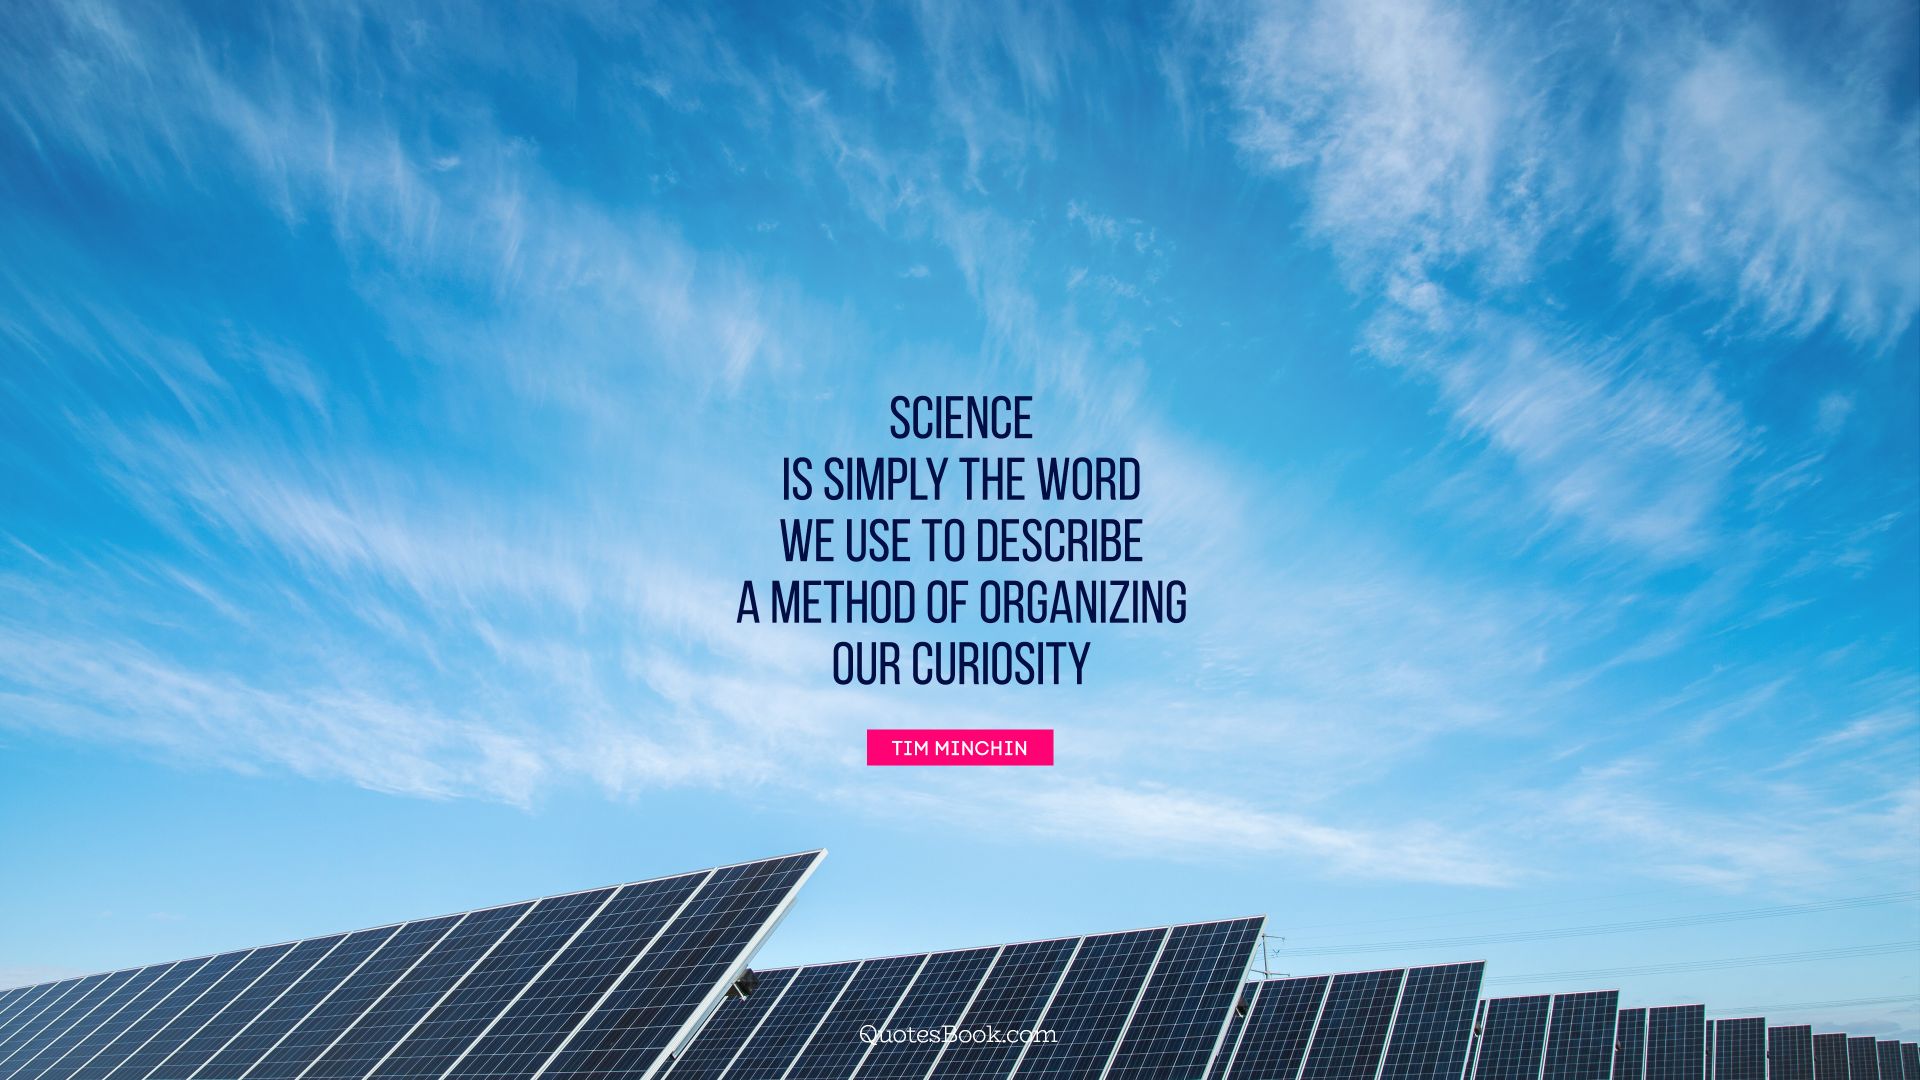 Science is simply the word we use to describe a method of organizing our curiosity. - Quote by Tim Minchin